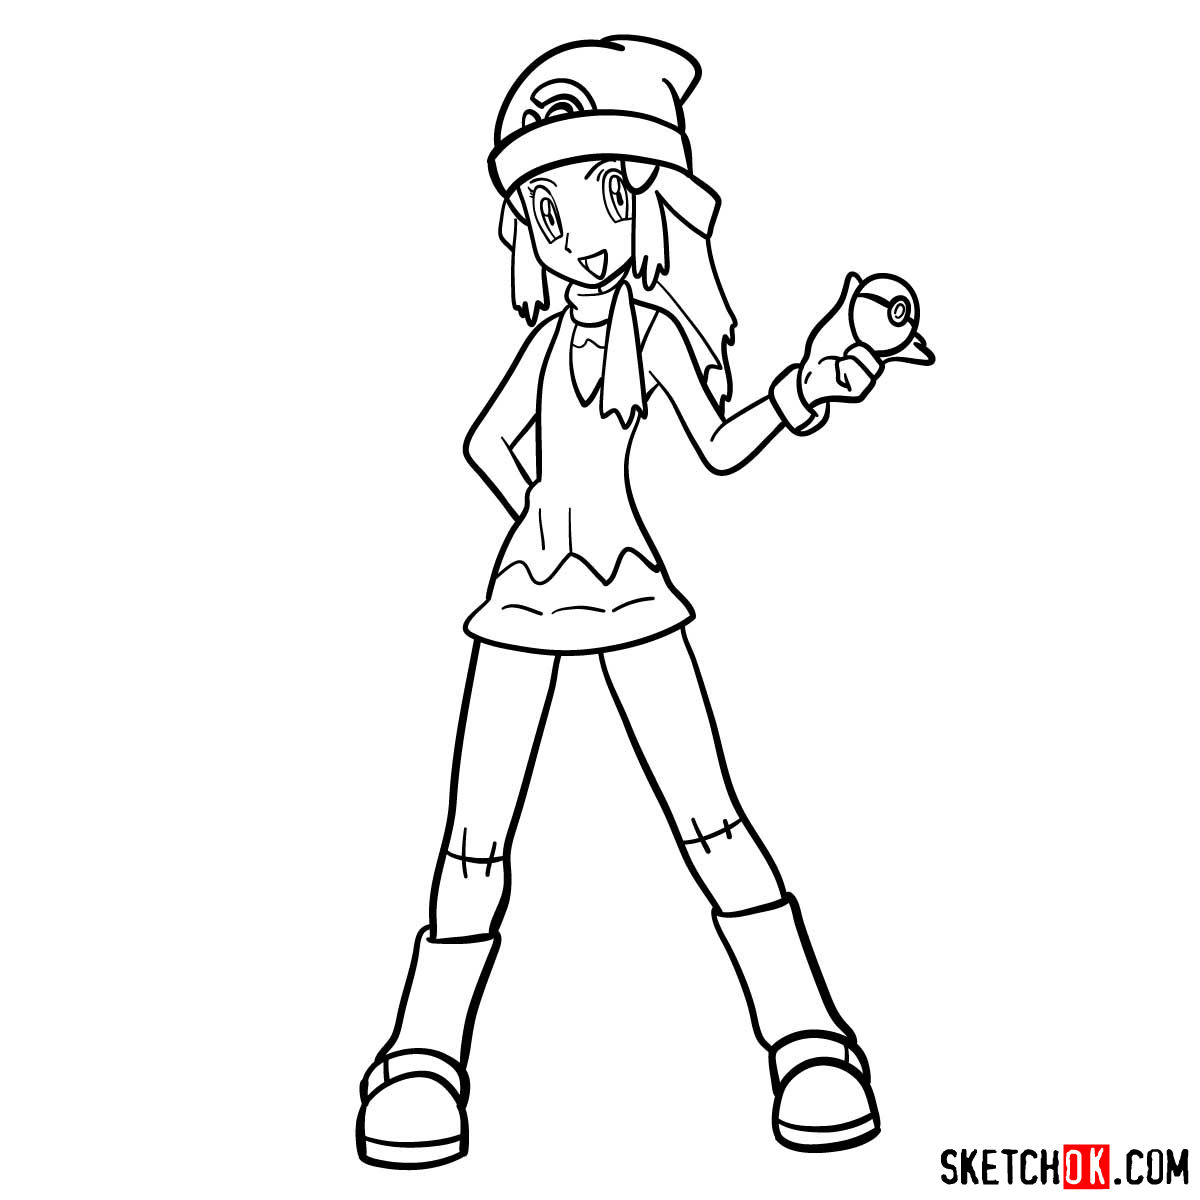 How to draw Dawn from Pokemon anime - step 16